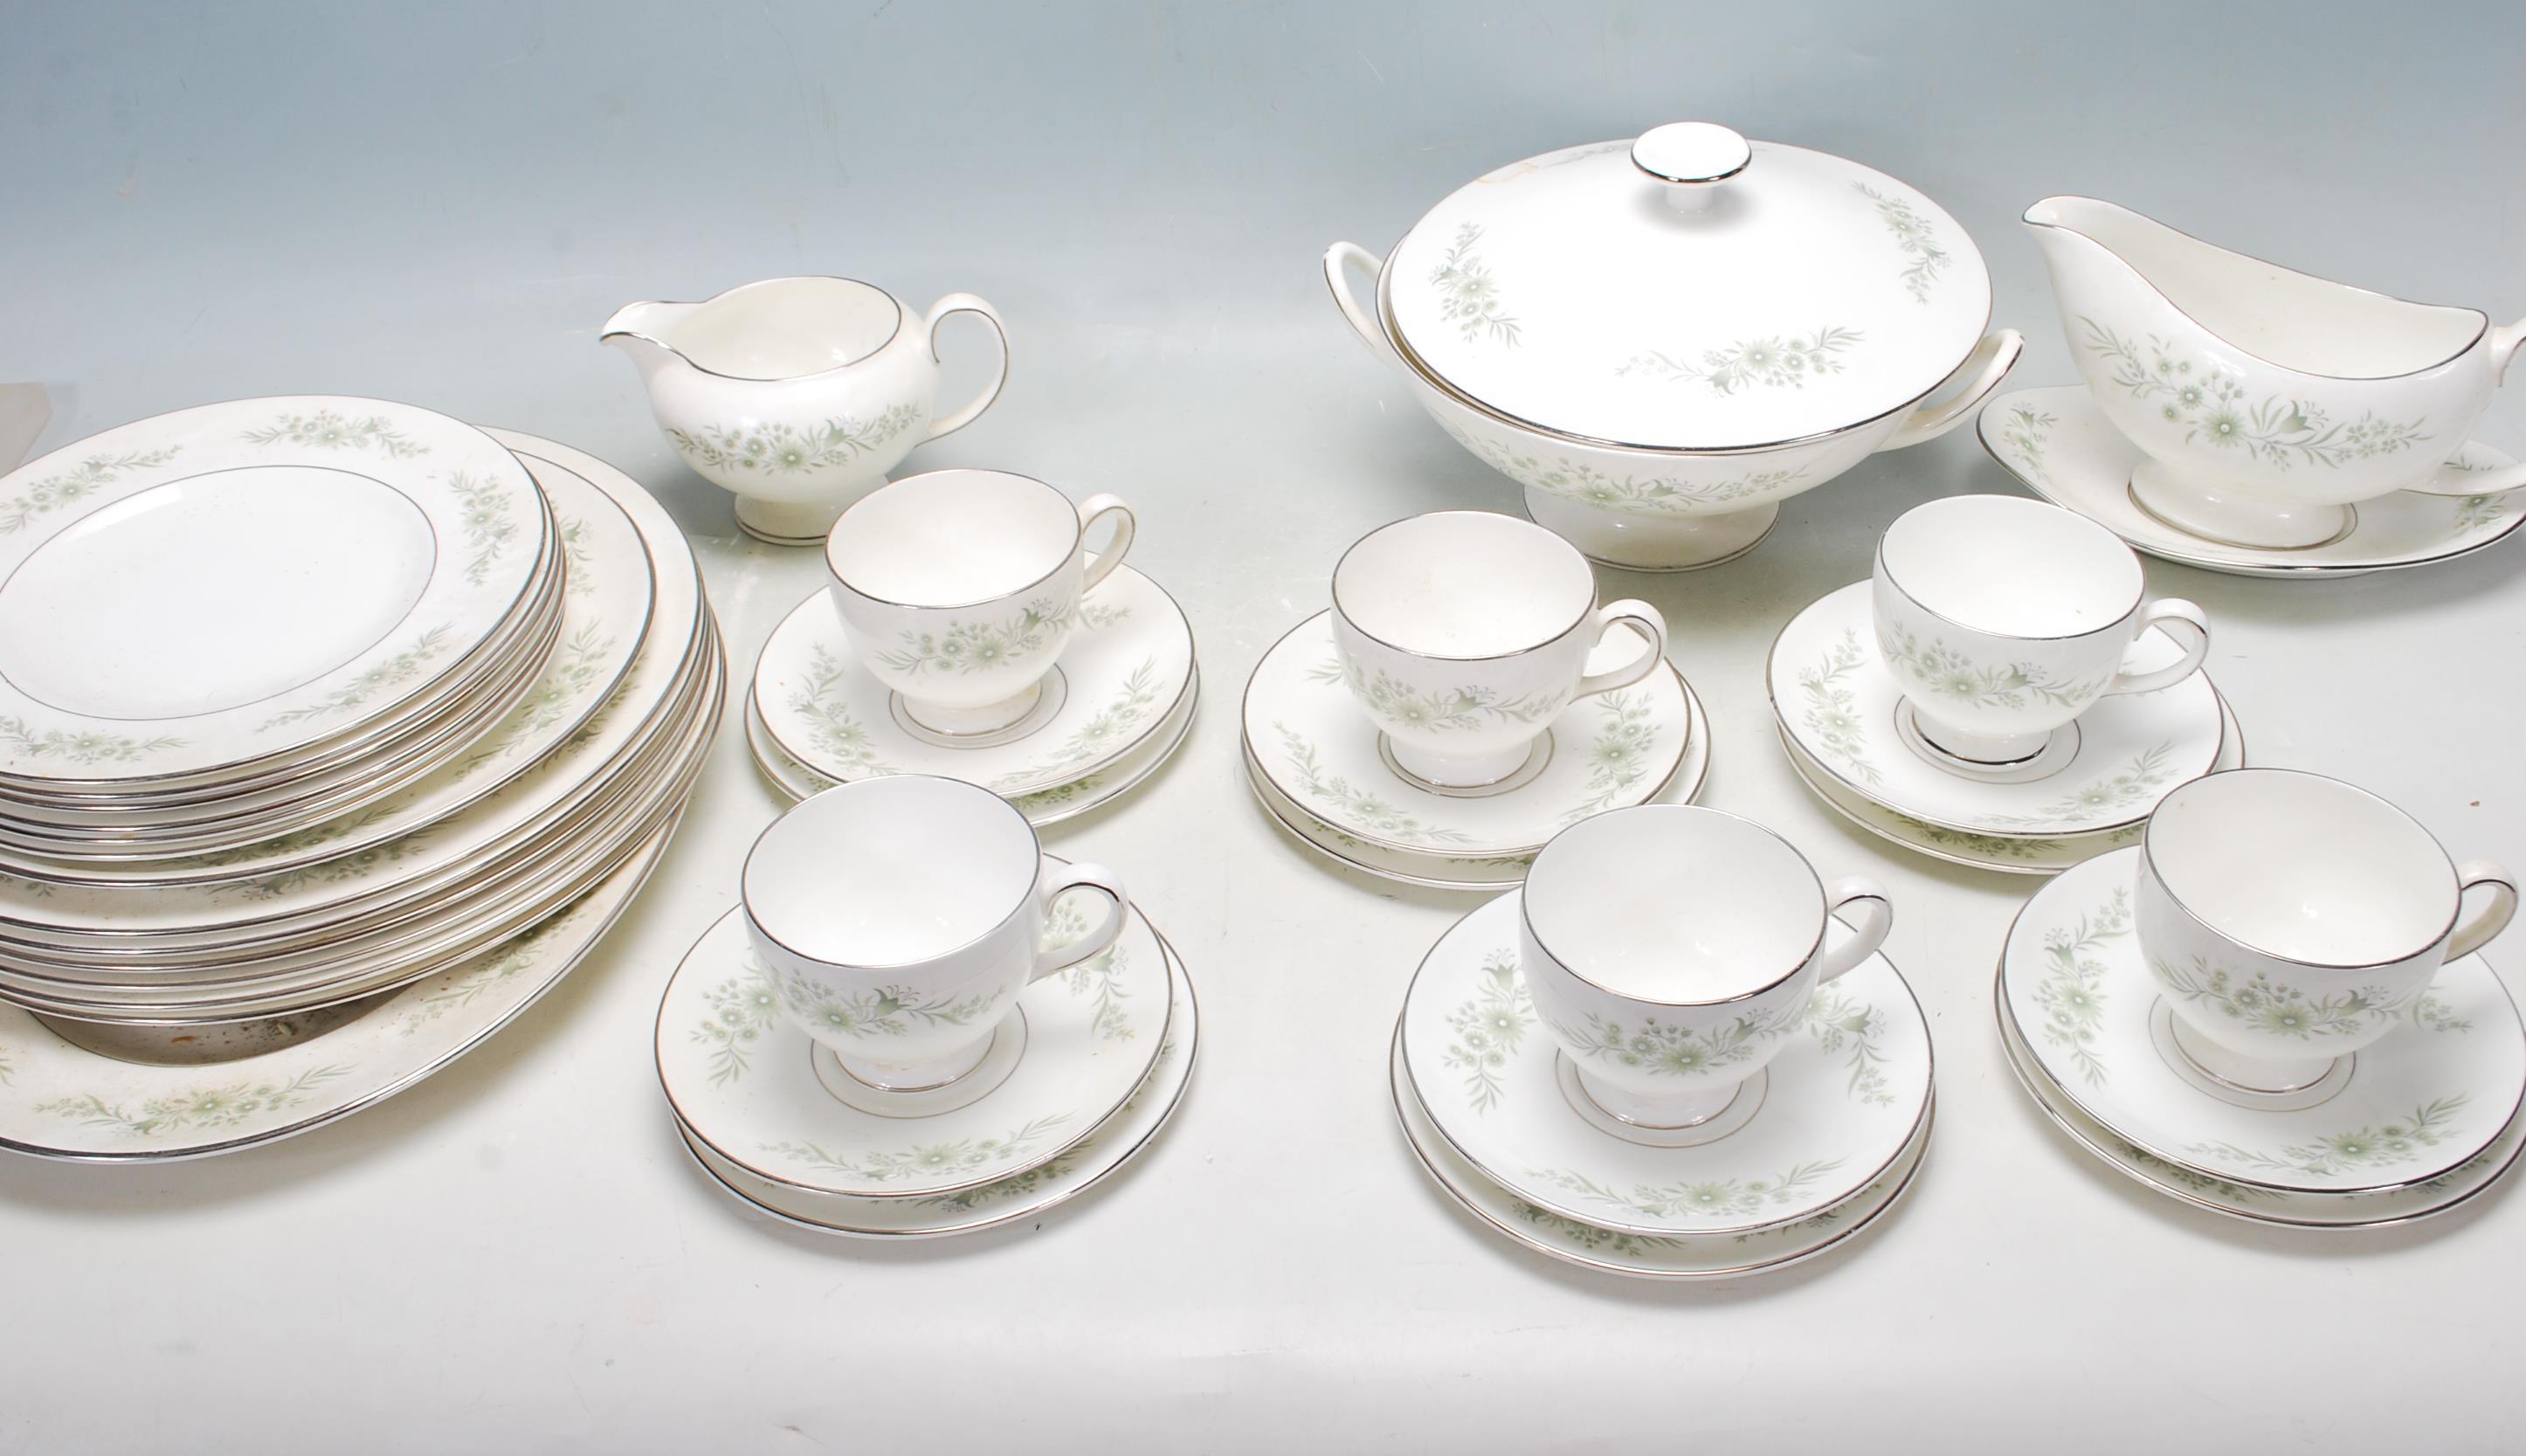 COLLECTION OF LATE 20TH CENTURY WEDGWOOD FINE BONE CHINA